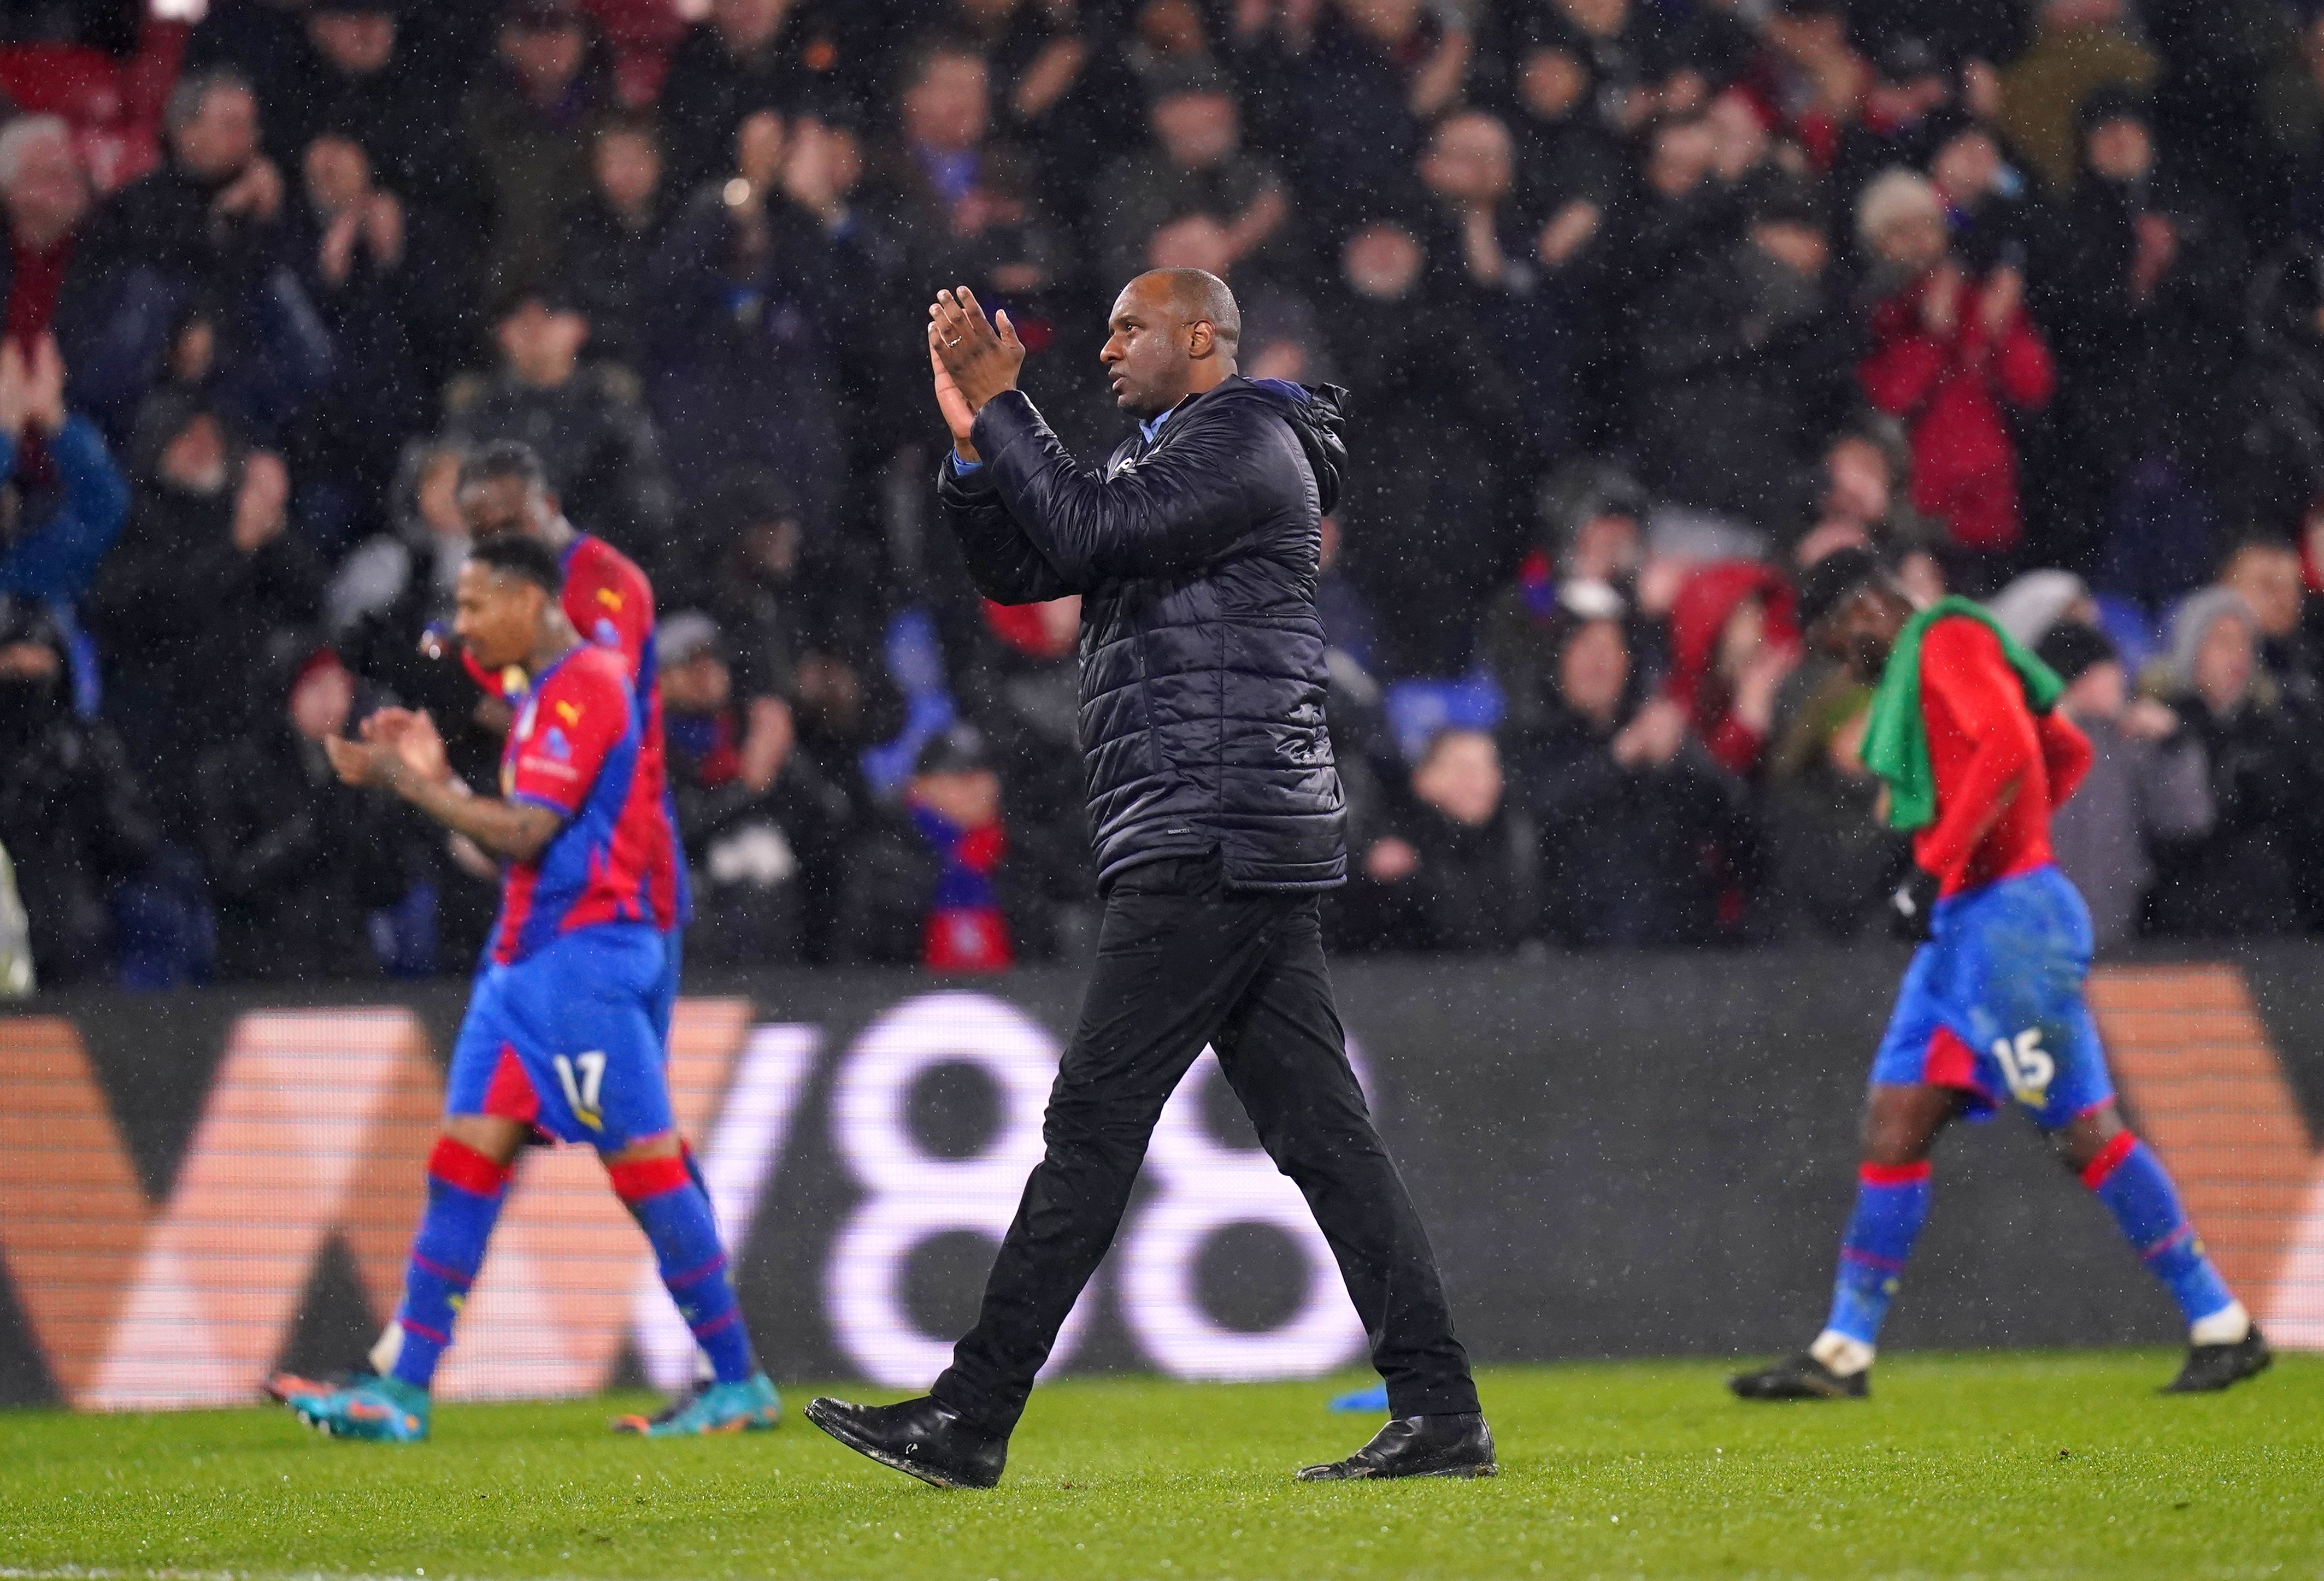 Crystal Palace manager Patrick Vieira applauds the fans after the 2-1 win over Stoke